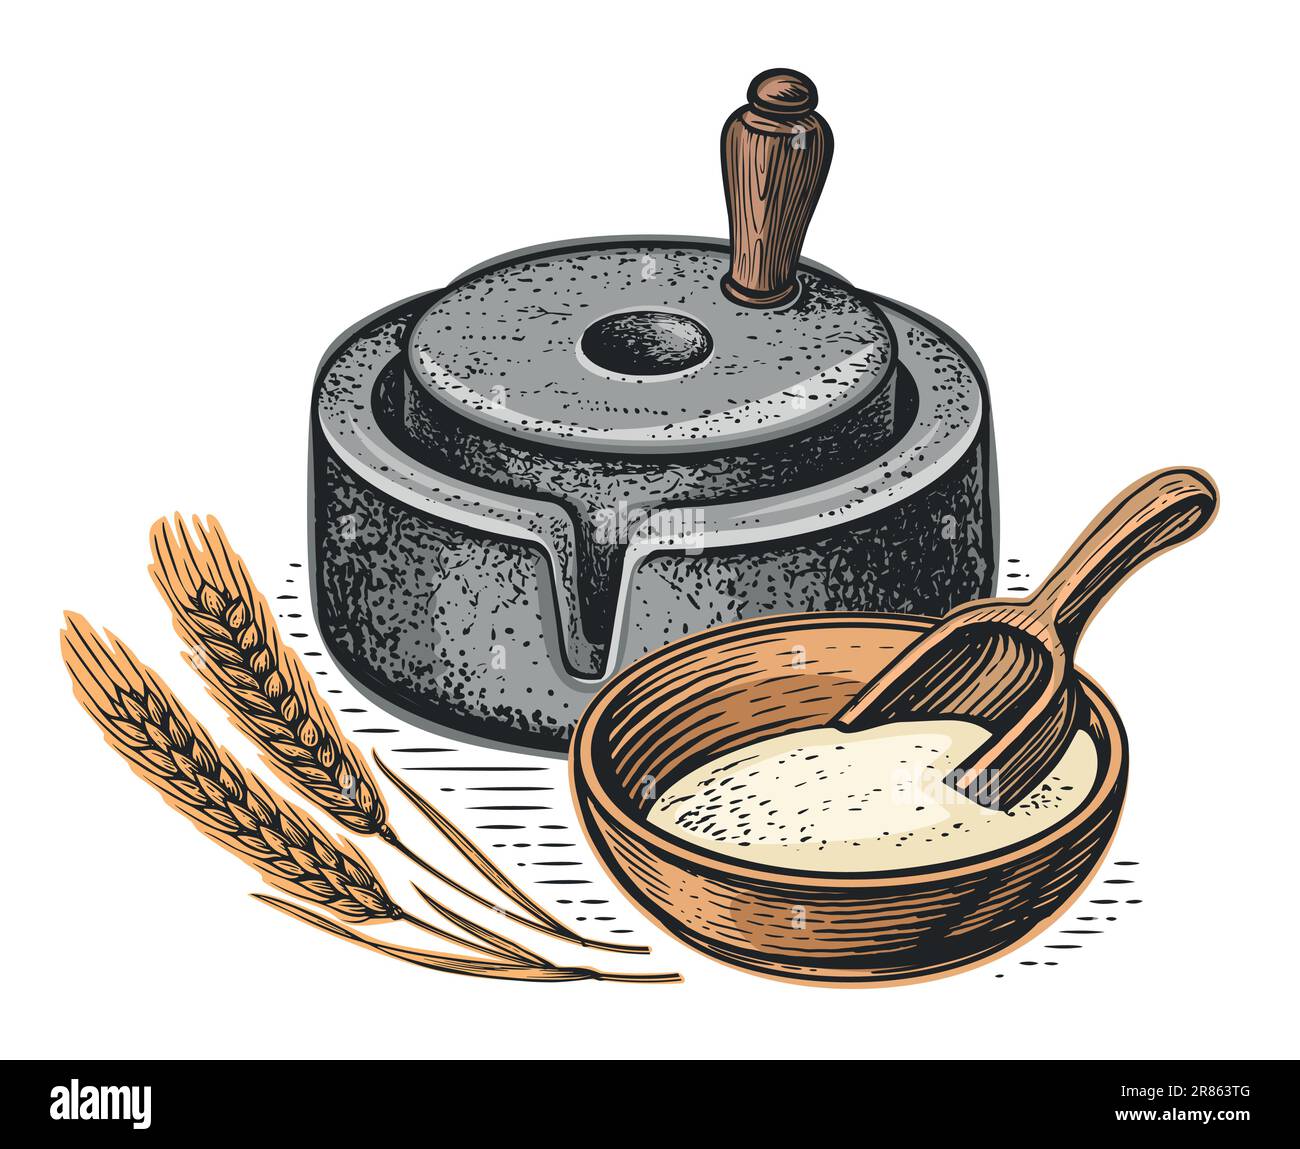 Wheat, bowl of grain and millstone, vector illustration. Flour production. Hand mill, stone tool for grinding grain Stock Vector